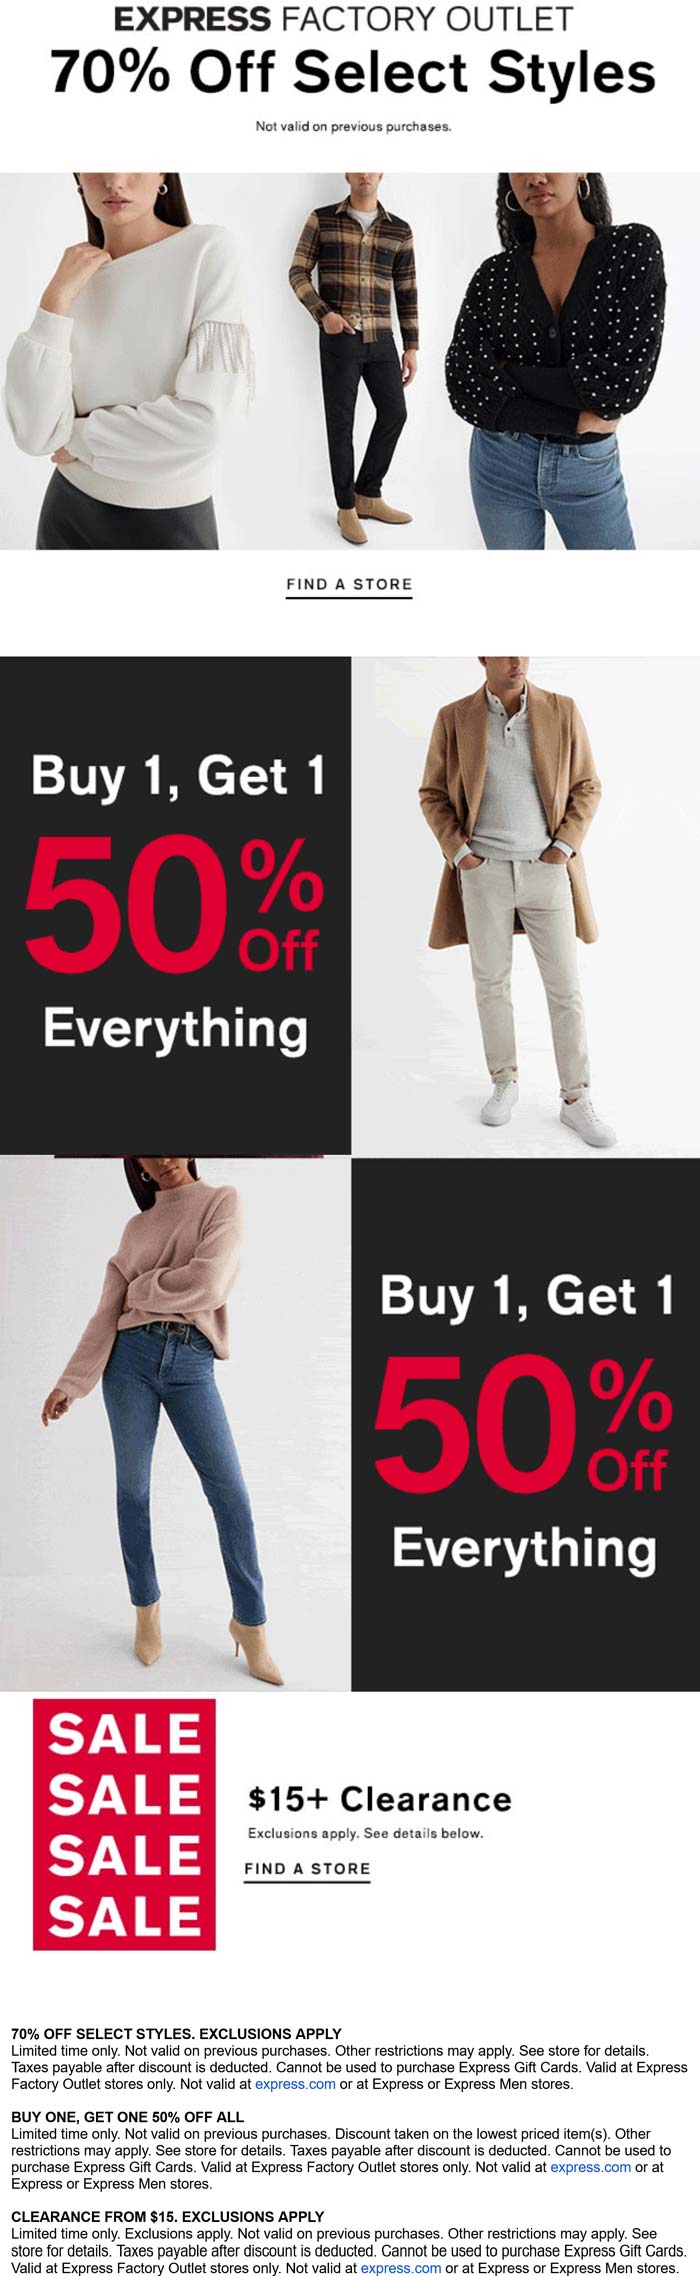 Second item 50% off on everything at Express Factory Outlet #expressfactoryoutlet